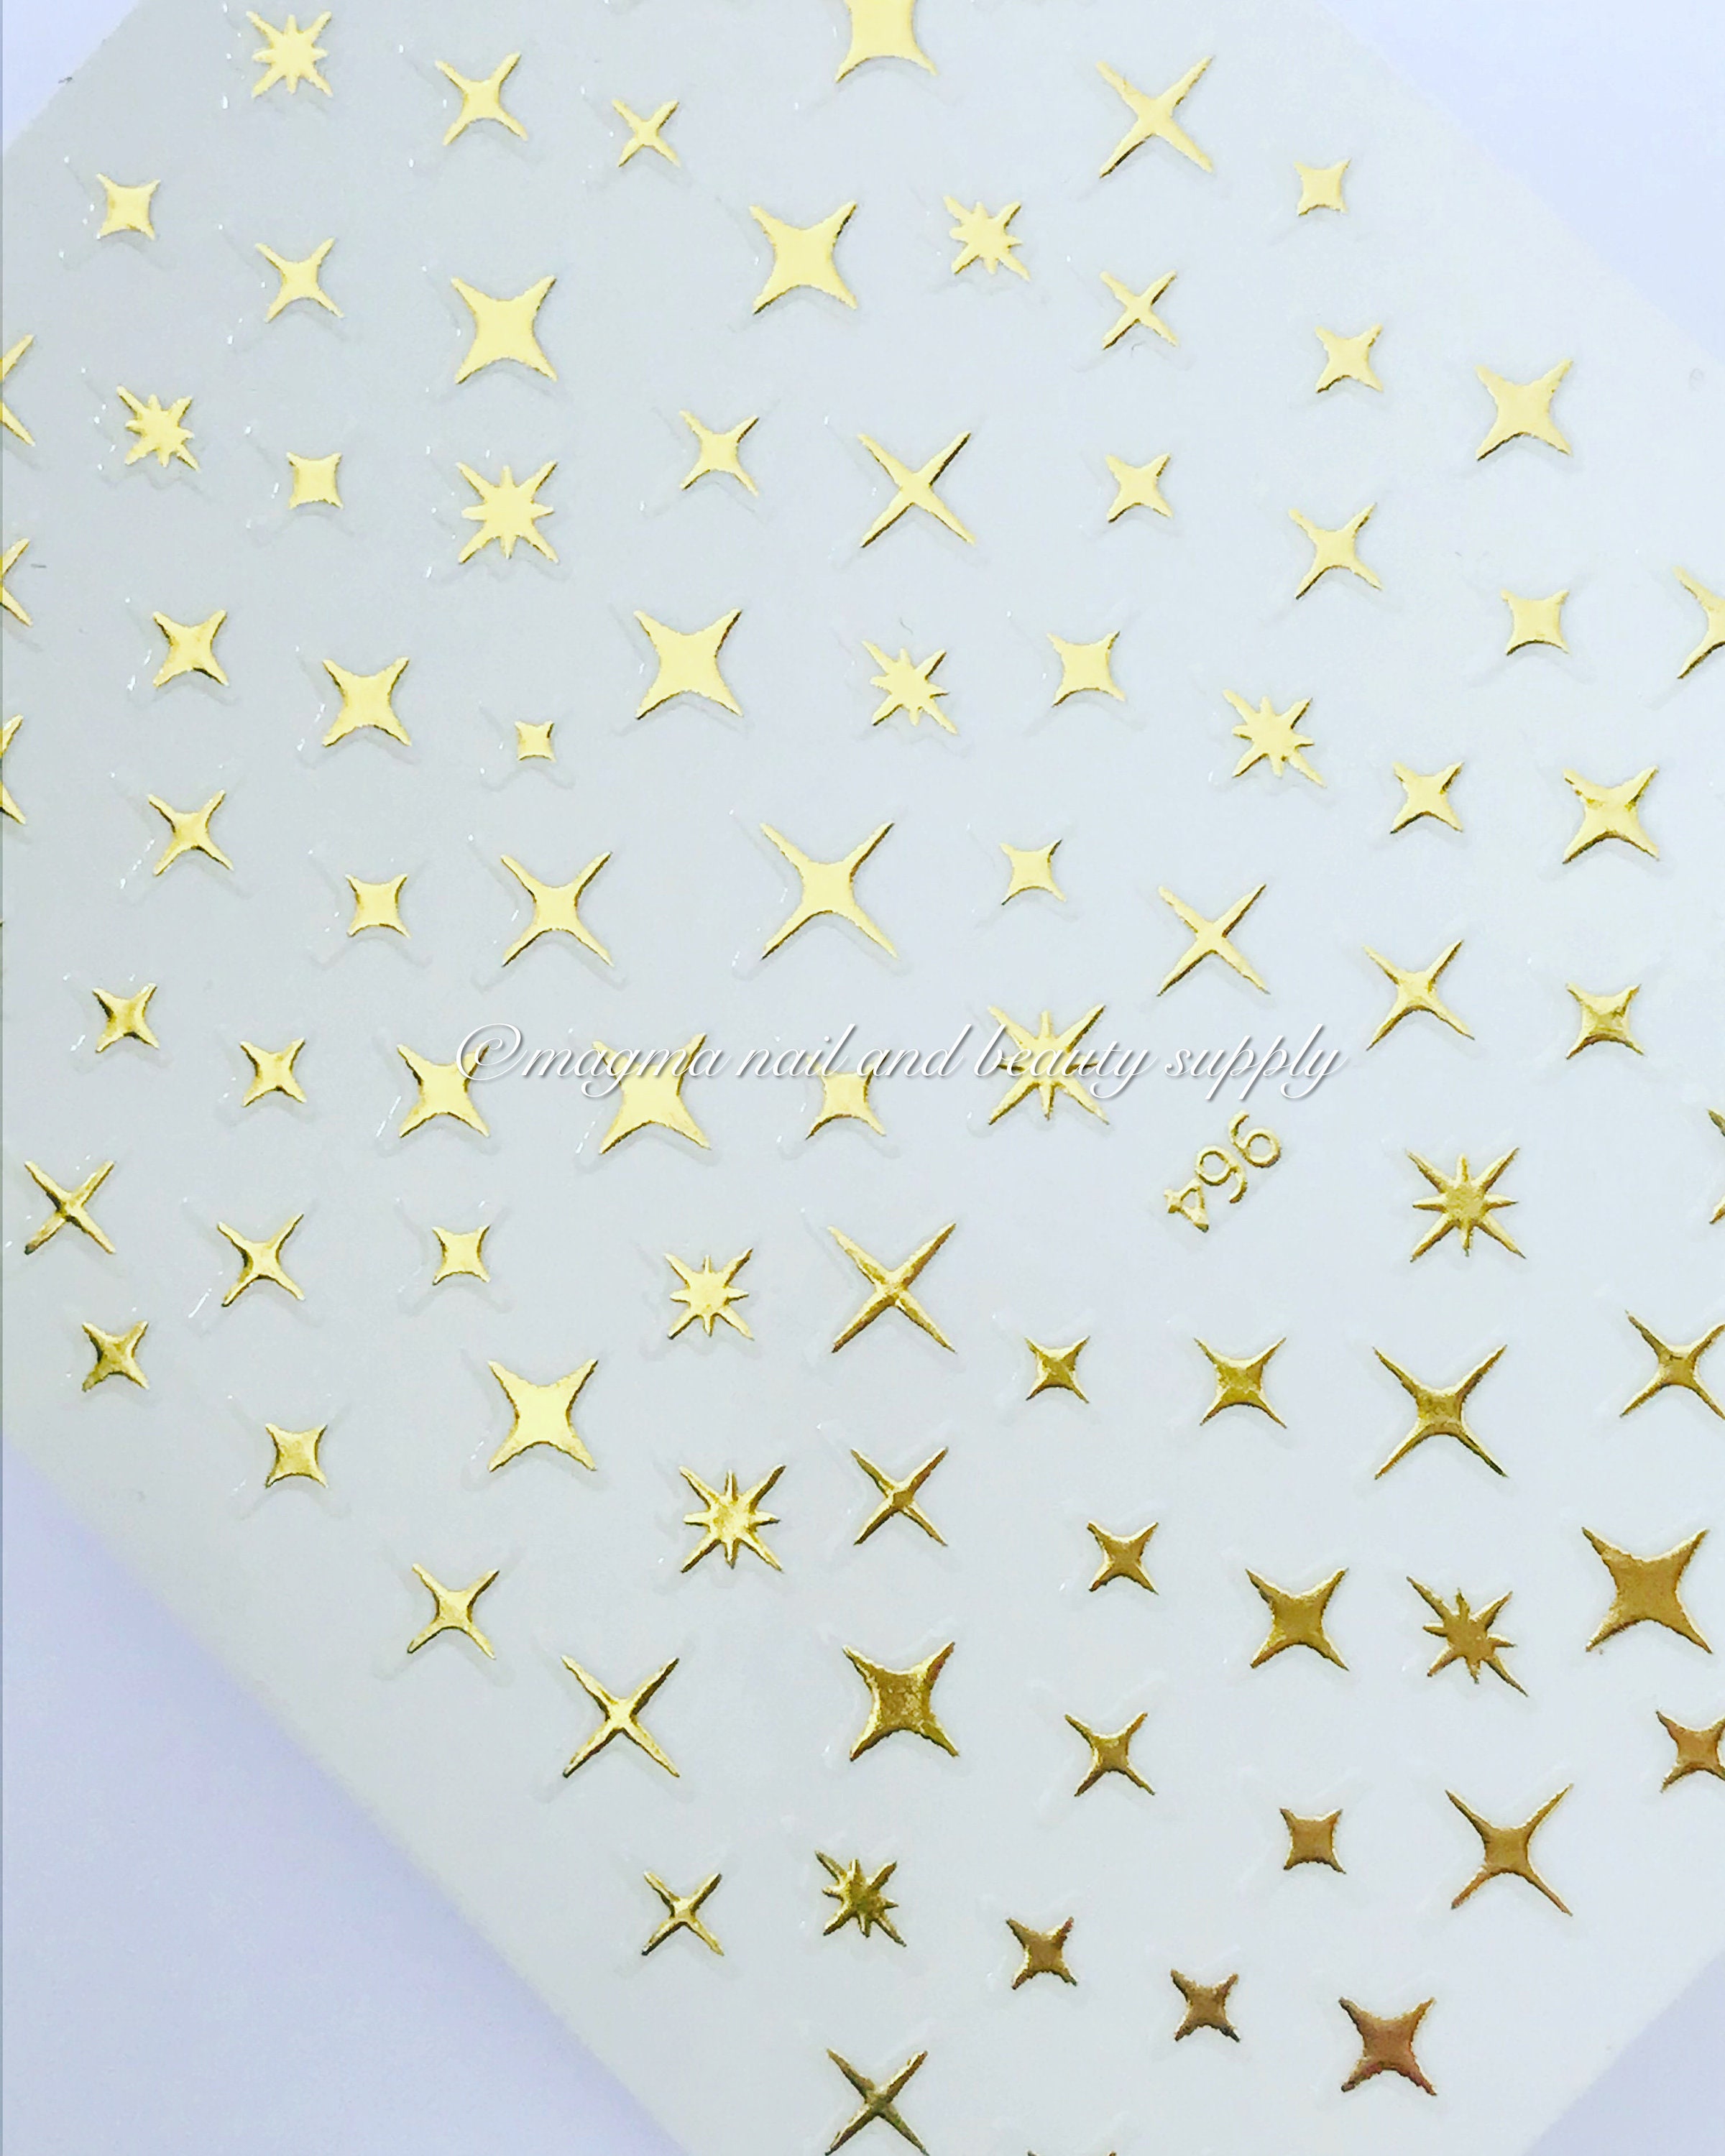 Gold Star Stickers Self Adhesive 700 Stars Sticky Peel and Stick